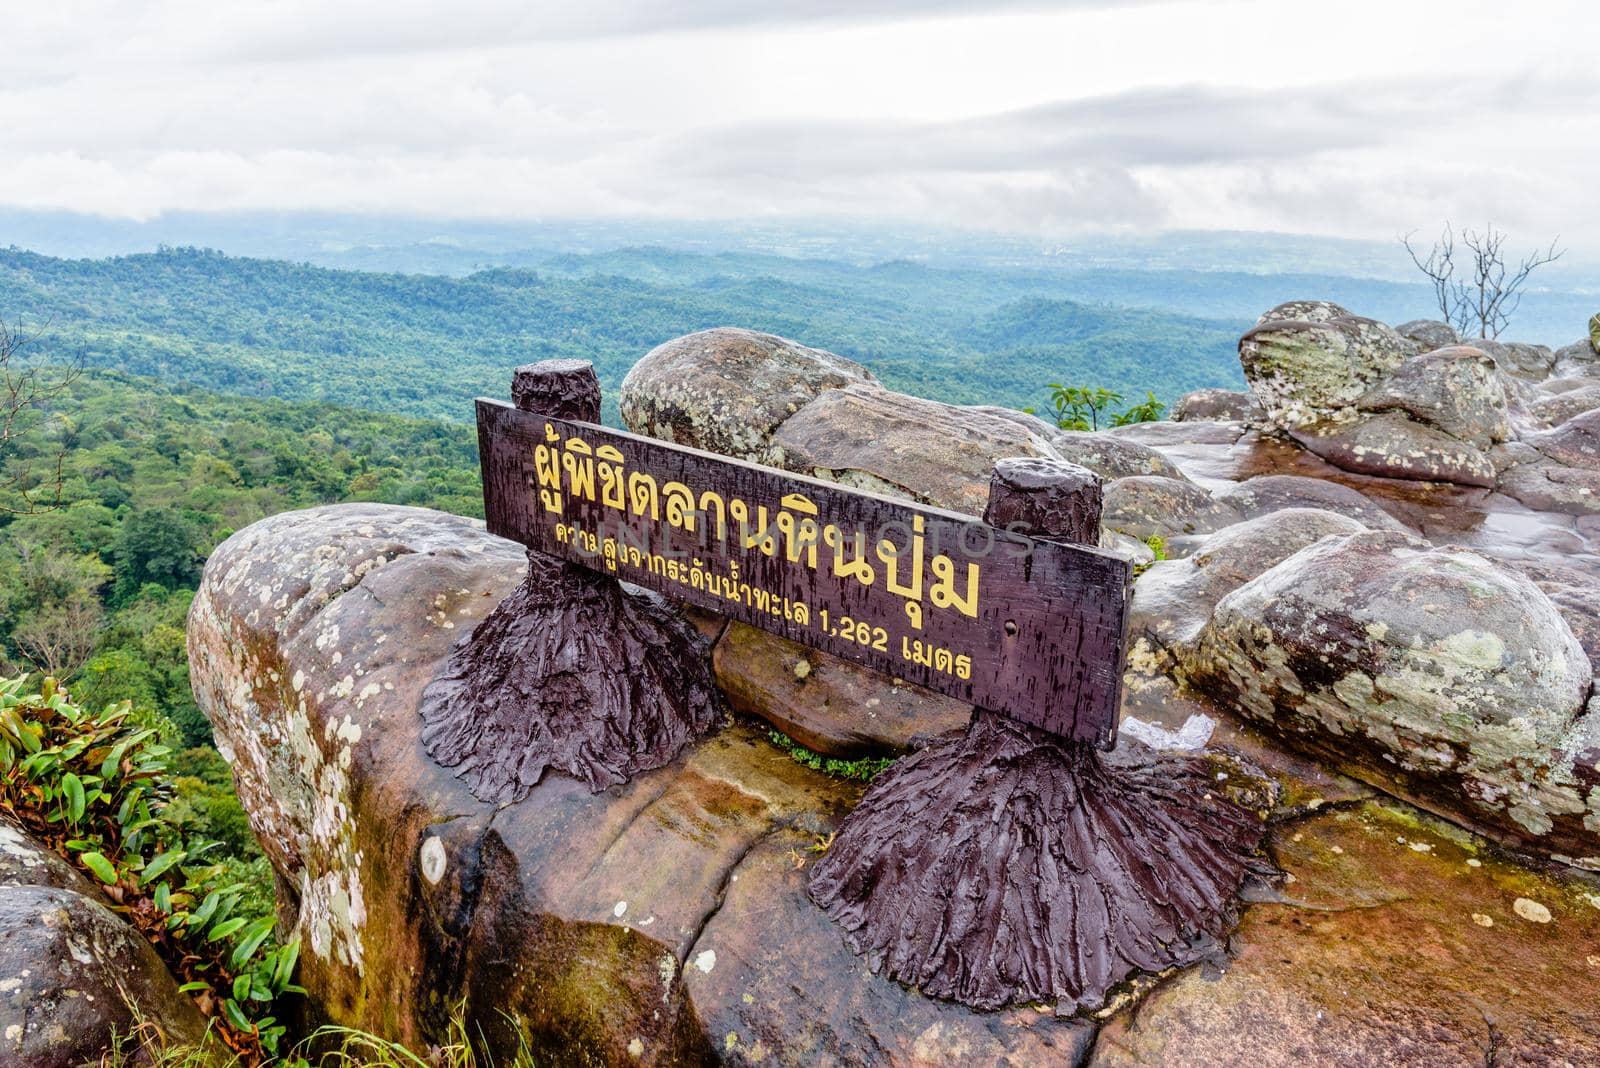 Beautiful nature landscape and Lan Hin Pum Nameplate in large stone courtyard while the rain is falling is a famous nature attractions of Phu Hin Rong Kla National Park, Phitsanulok, Thailand